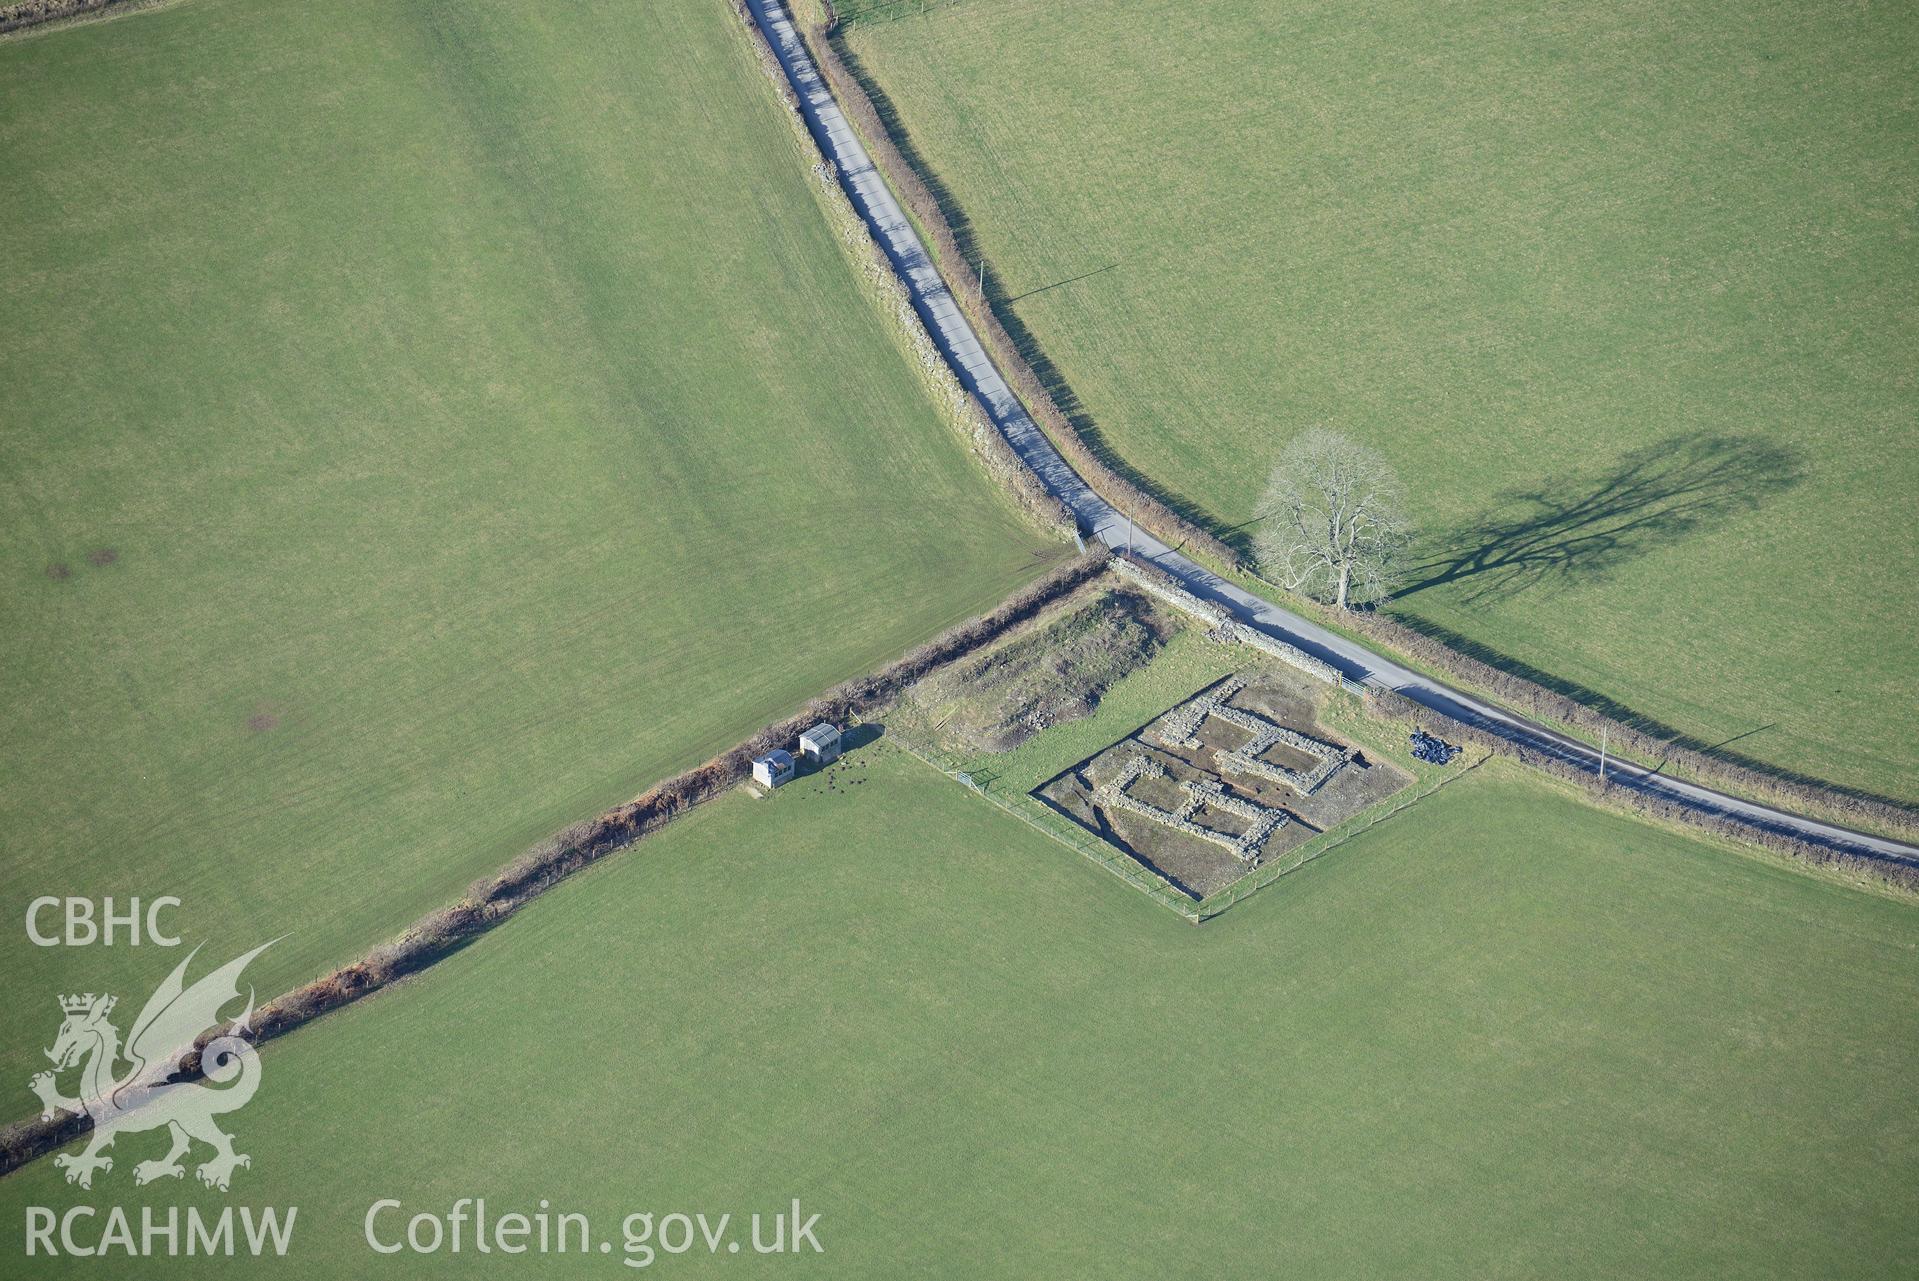 The gatehouse at the Strata Florida Abbey Precinct, south of Pontrhydfendigaid. Oblique aerial photograph taken during the Royal Commission's programme of archaeological aerial reconnaissance by Toby Driver on 4th February 2015.